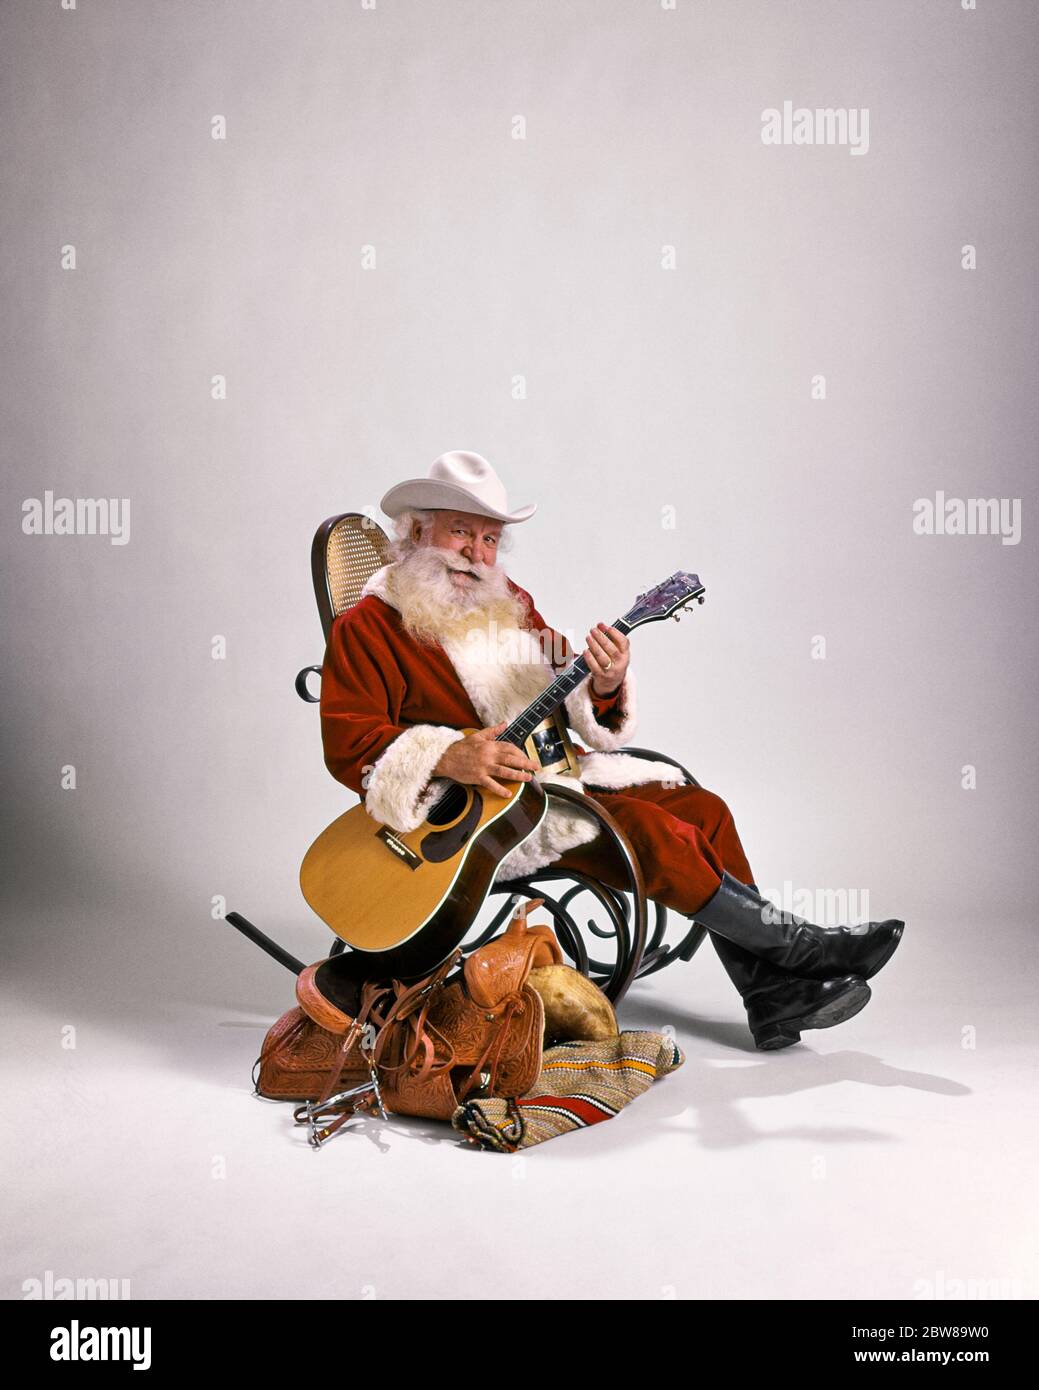 1980s COWBOY SANTA CLAUS LOOKING AT CAMERA SITTING IN BENTWOOD ROCKER BESIDE WESTERN SADDLE PLAYING GUITAR WEARING WHITE HAT - kx11156 PHT001 HARS NOSTALGIC SYMBOL SUBURBAN URBAN XMAS COLOR OLD TIME BUSY NOSTALGIA OLD FASHION BEARD 1 FACIAL STYLE COMMUNICATION EVE PEACE ROCKING JOY LIFESTYLE MUSICIAN JOBS STUDIO SHOT ROCKER RURAL GROWNUP CLAUS HOME LIFE COPY SPACE FULL-LENGTH ICON PERSONS SADDLE WISE GROWN-UP CARING CHARACTER MALES WESTERN ENTERTAINMENT SPIRITUALITY SENIOR MAN SAINT SENIOR ADULT WINTERTIME EYE CONTACT WINTER SEASON MUSTACHE PERFORMING ARTS ICONS HAIRS OCCUPATION HAPPINESS Stock Photo